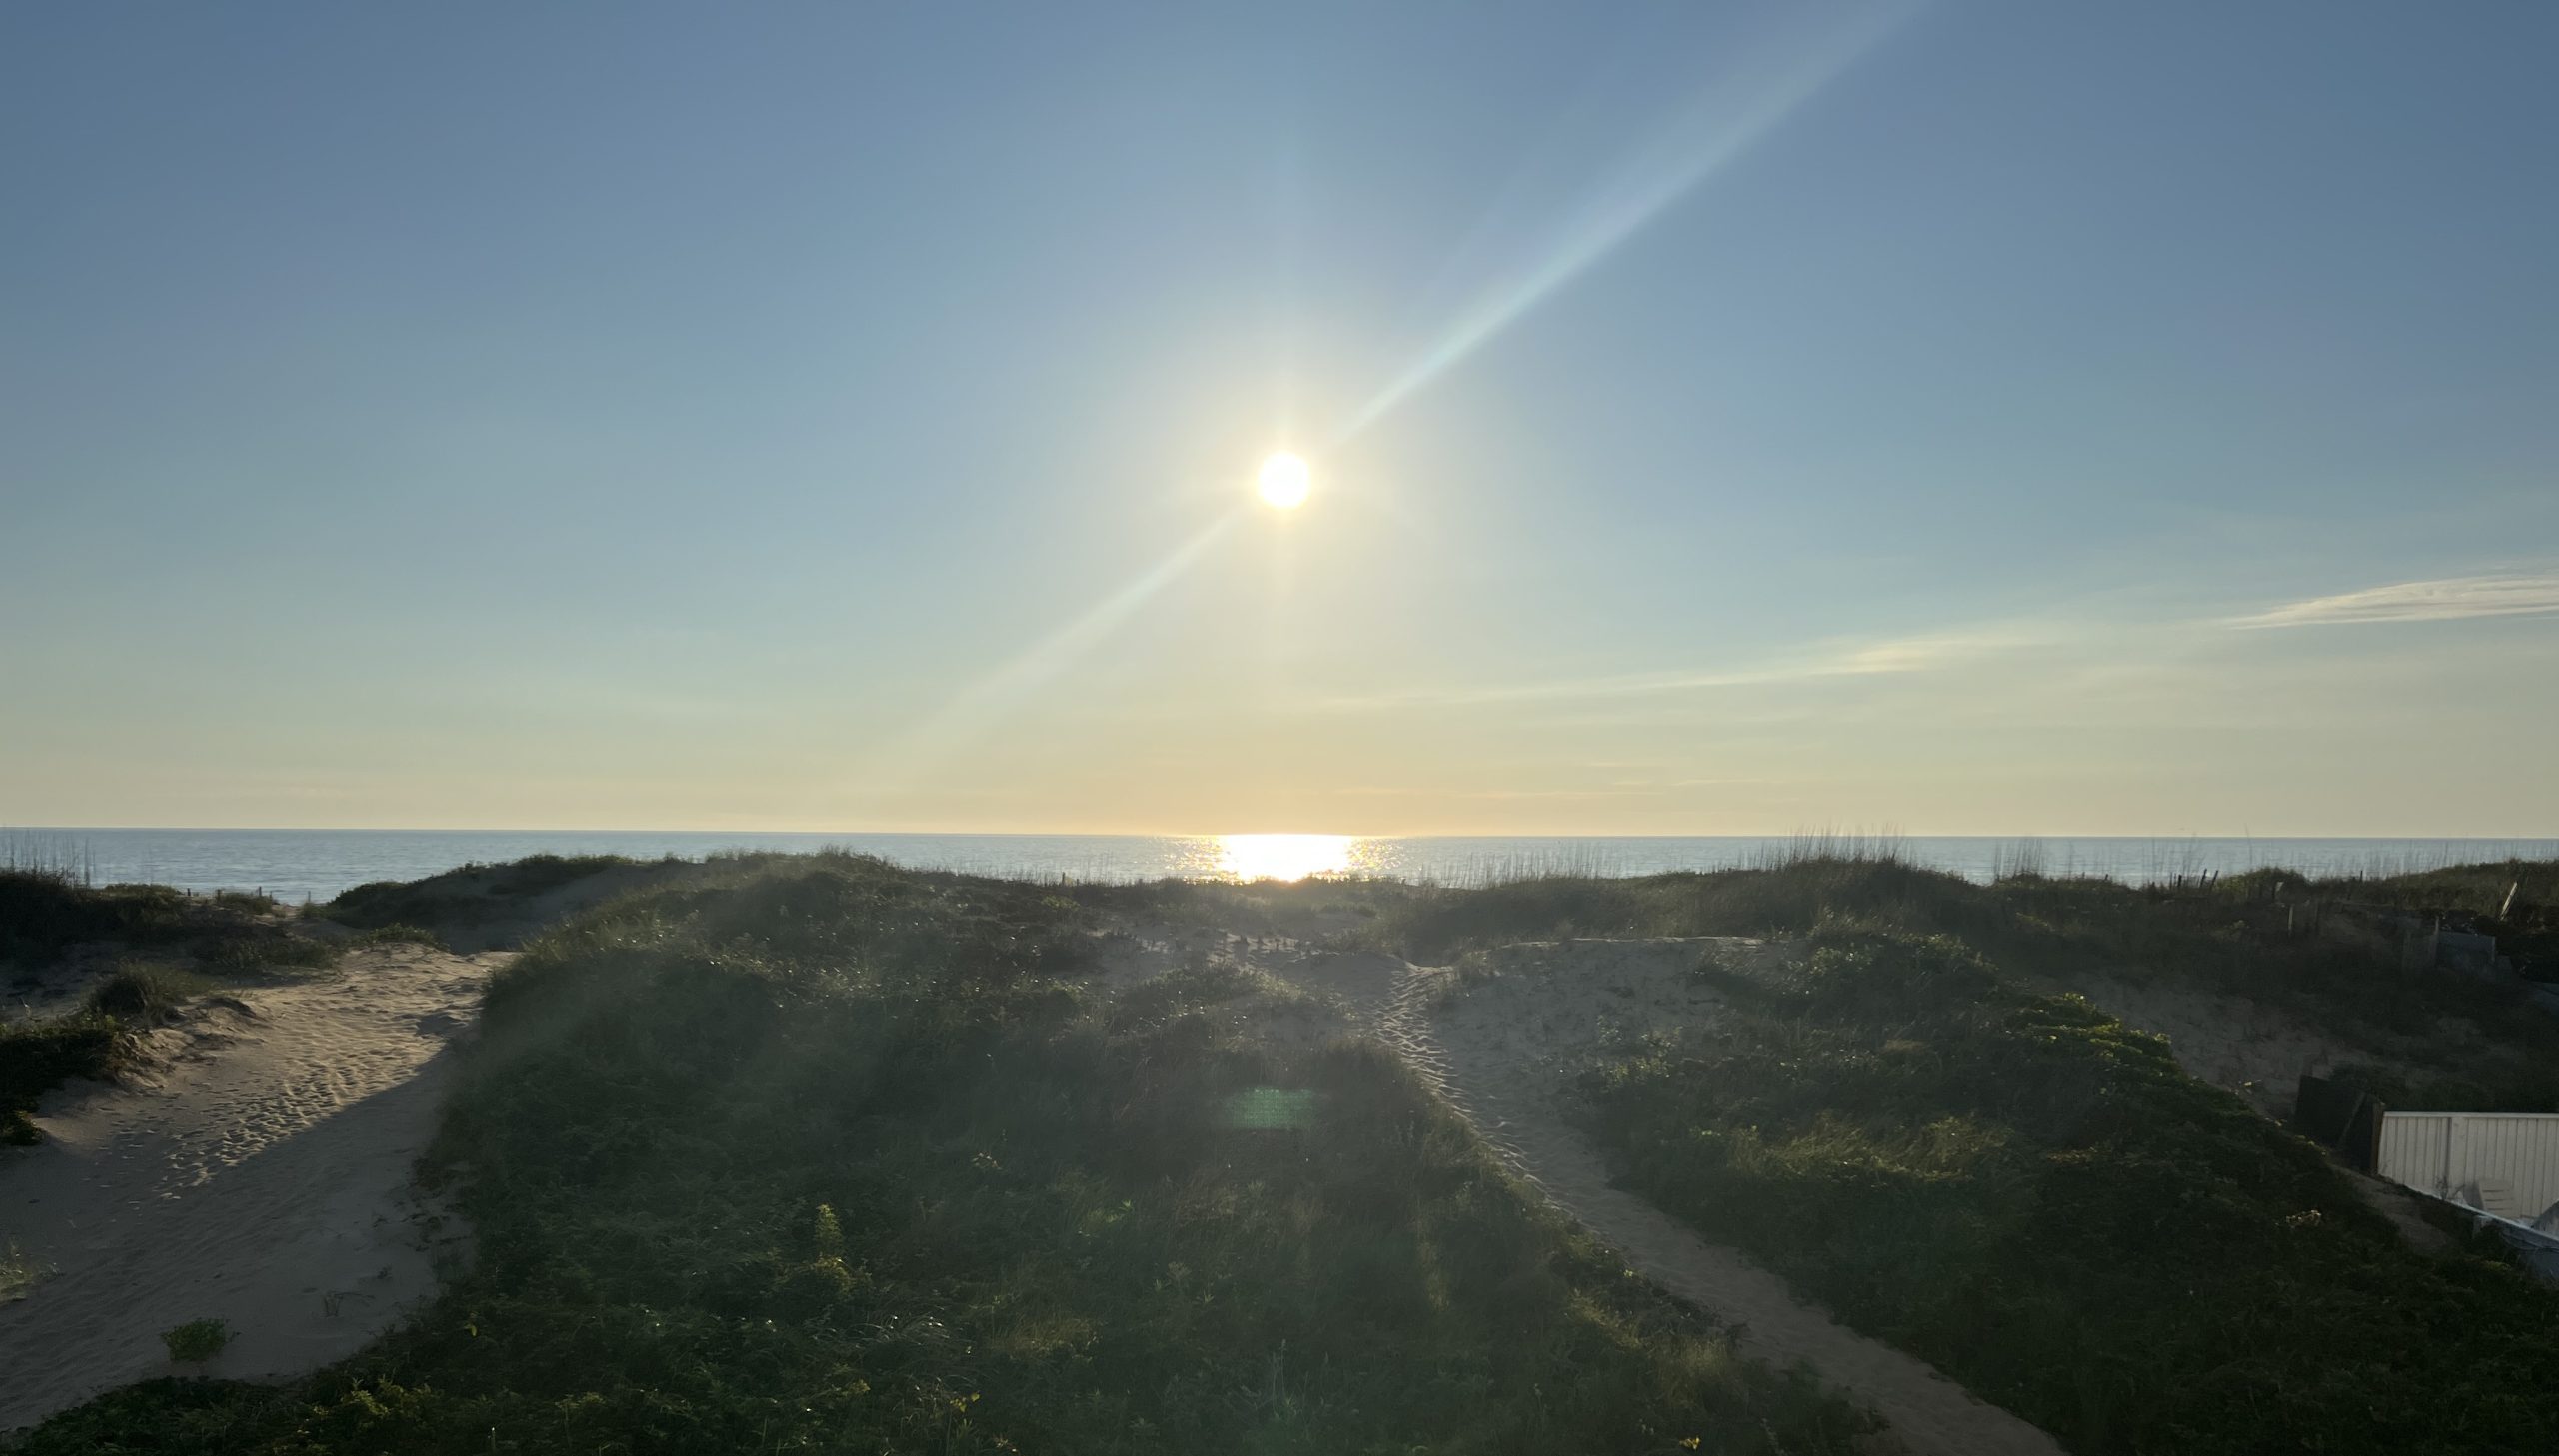 The Sun rising over the Atlantic Ocean, with a dune in the foreground.